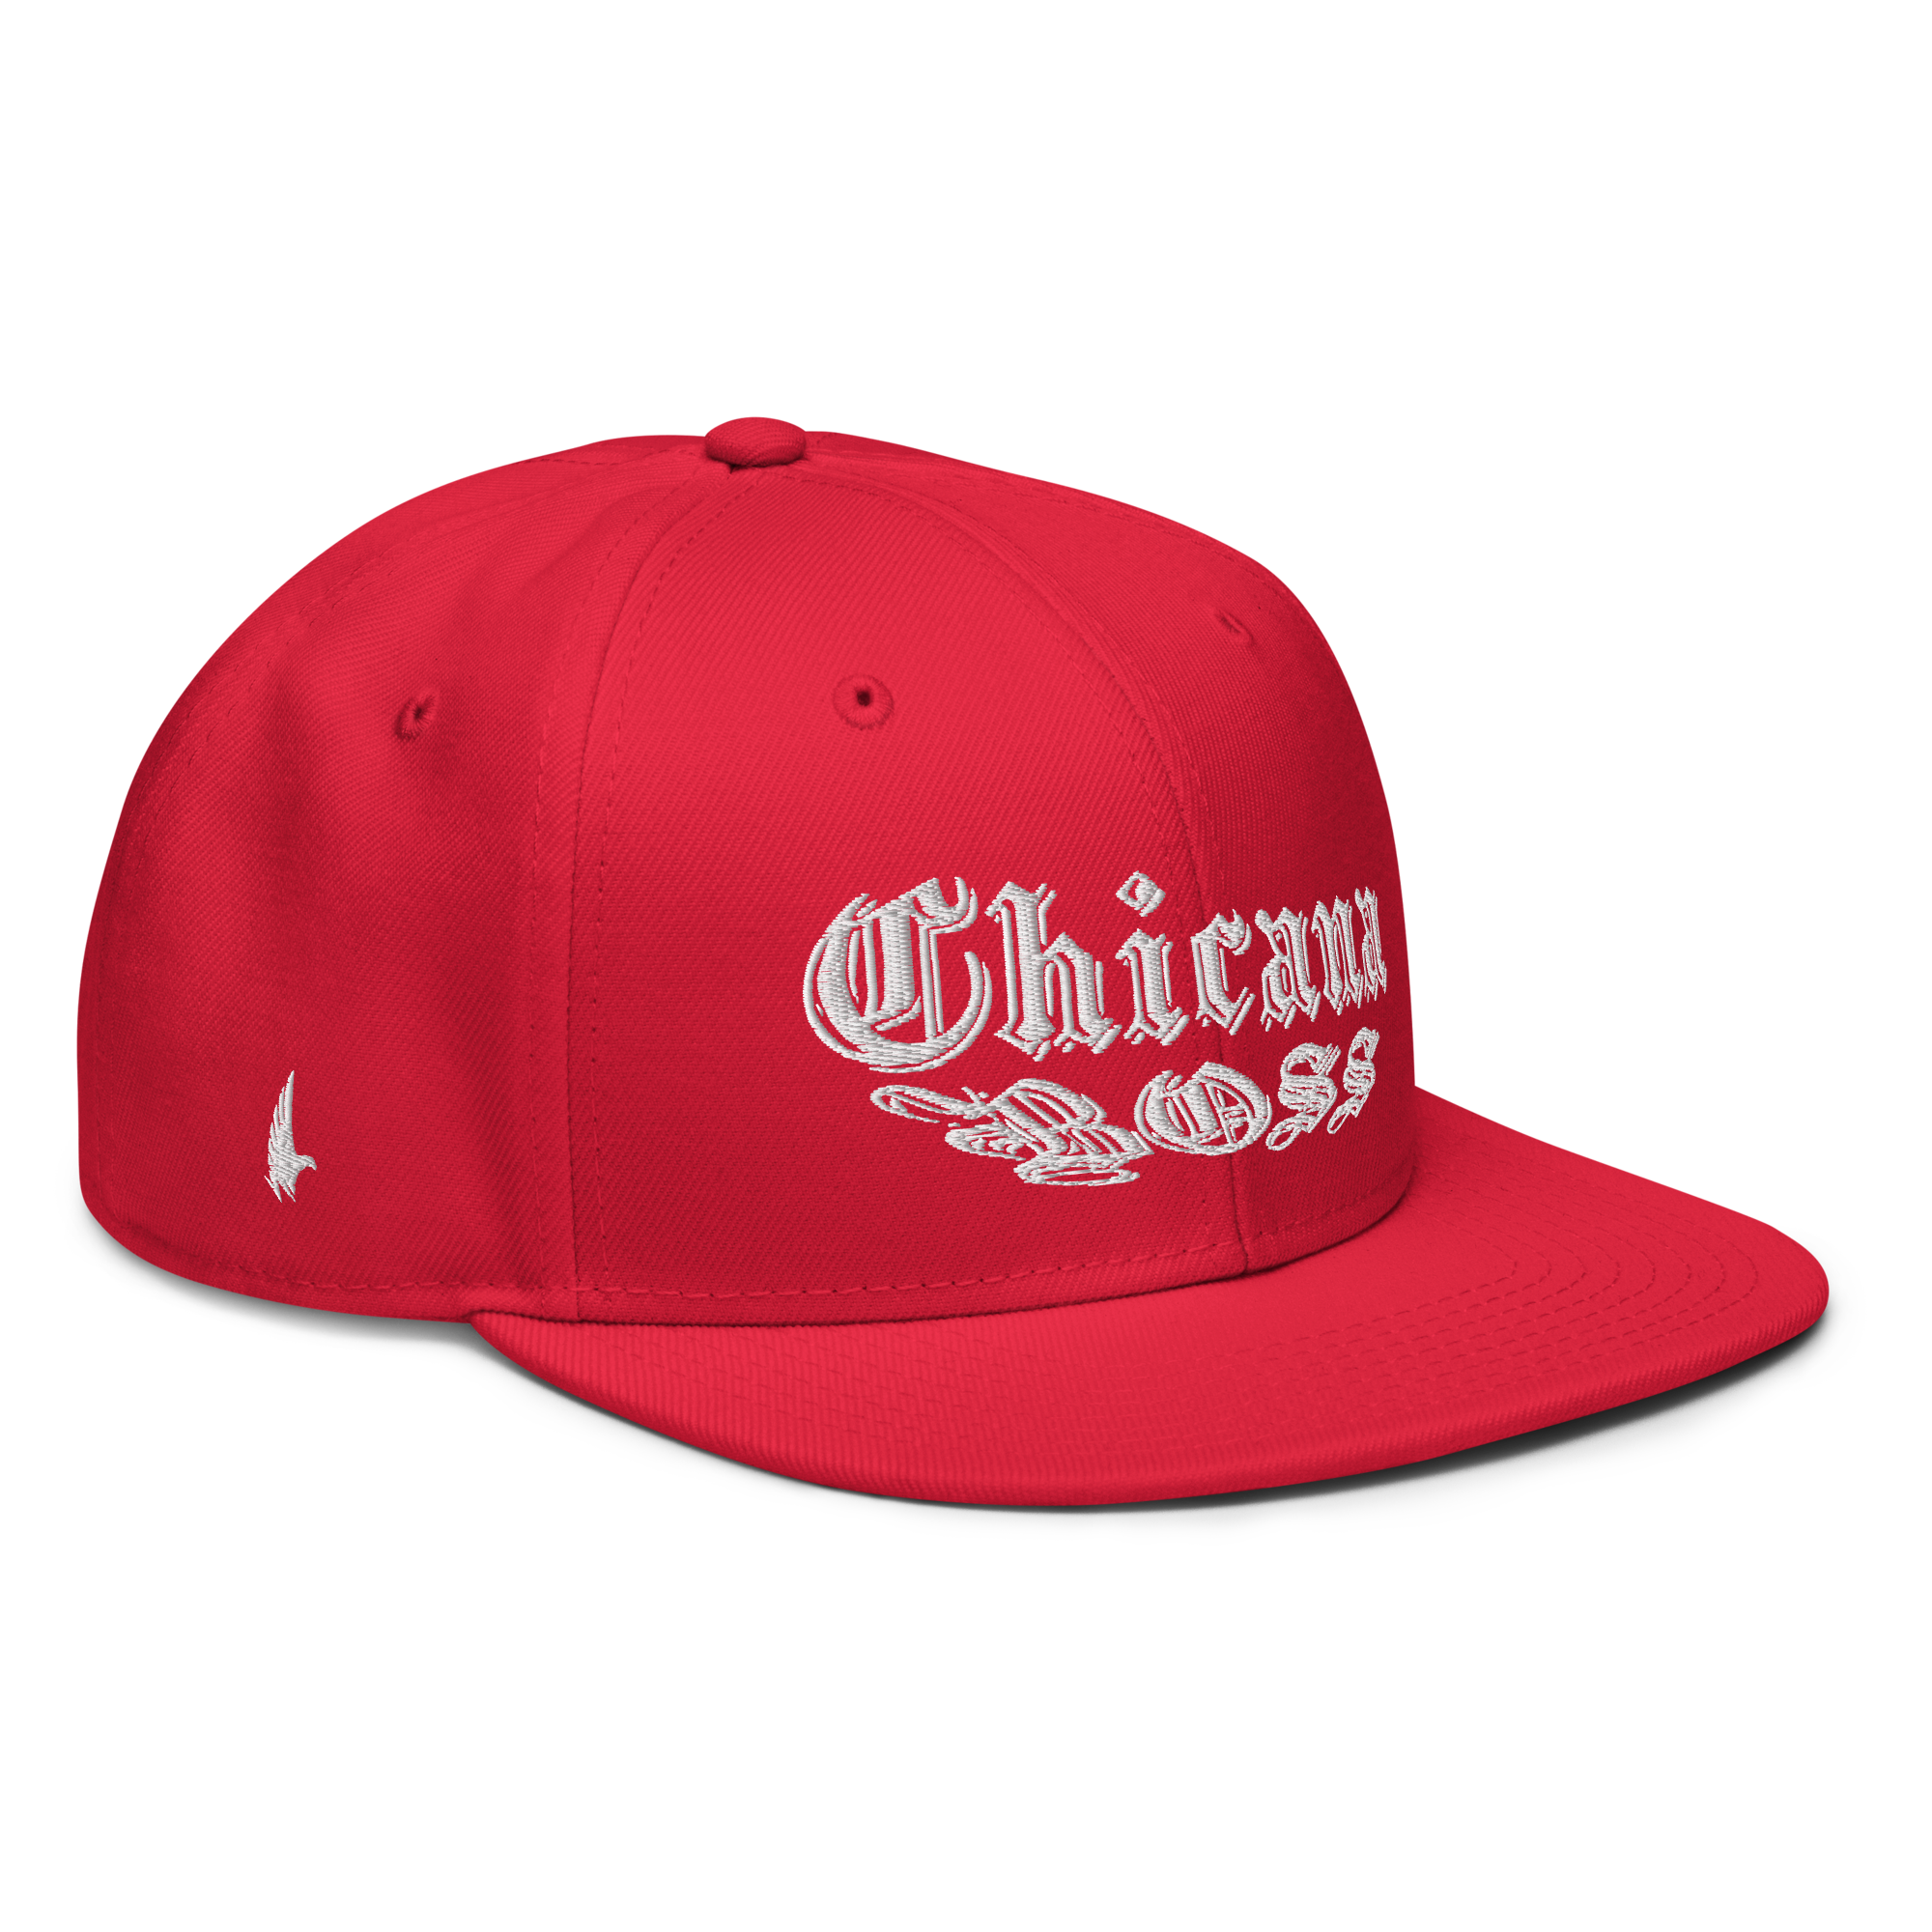 Chicana Boss Snapback Hat - Red - Loyalty Vibes